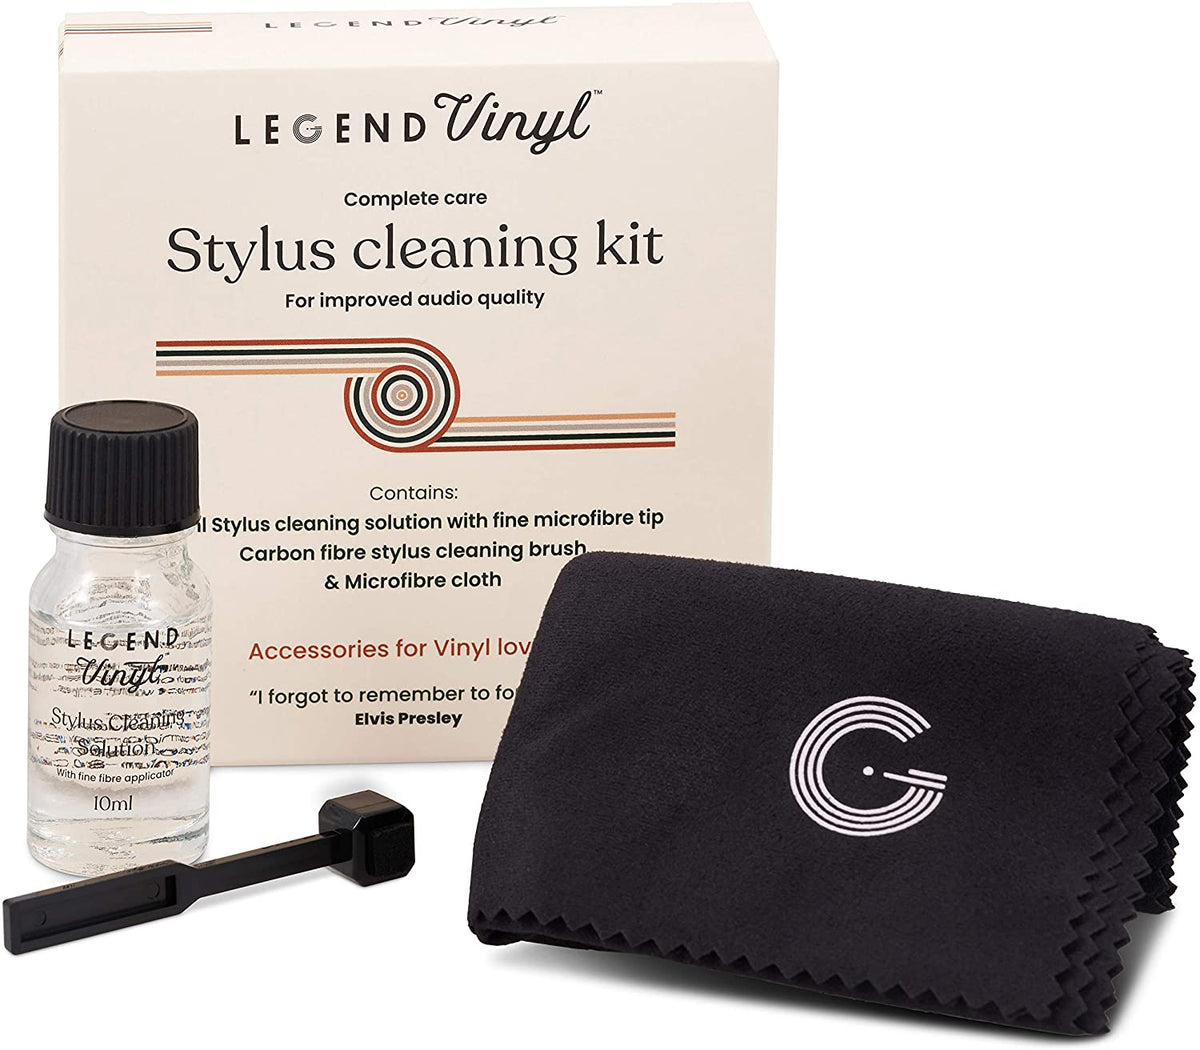 LEGENDS STYLUS CLEANING KIT [ACCESSORIES]